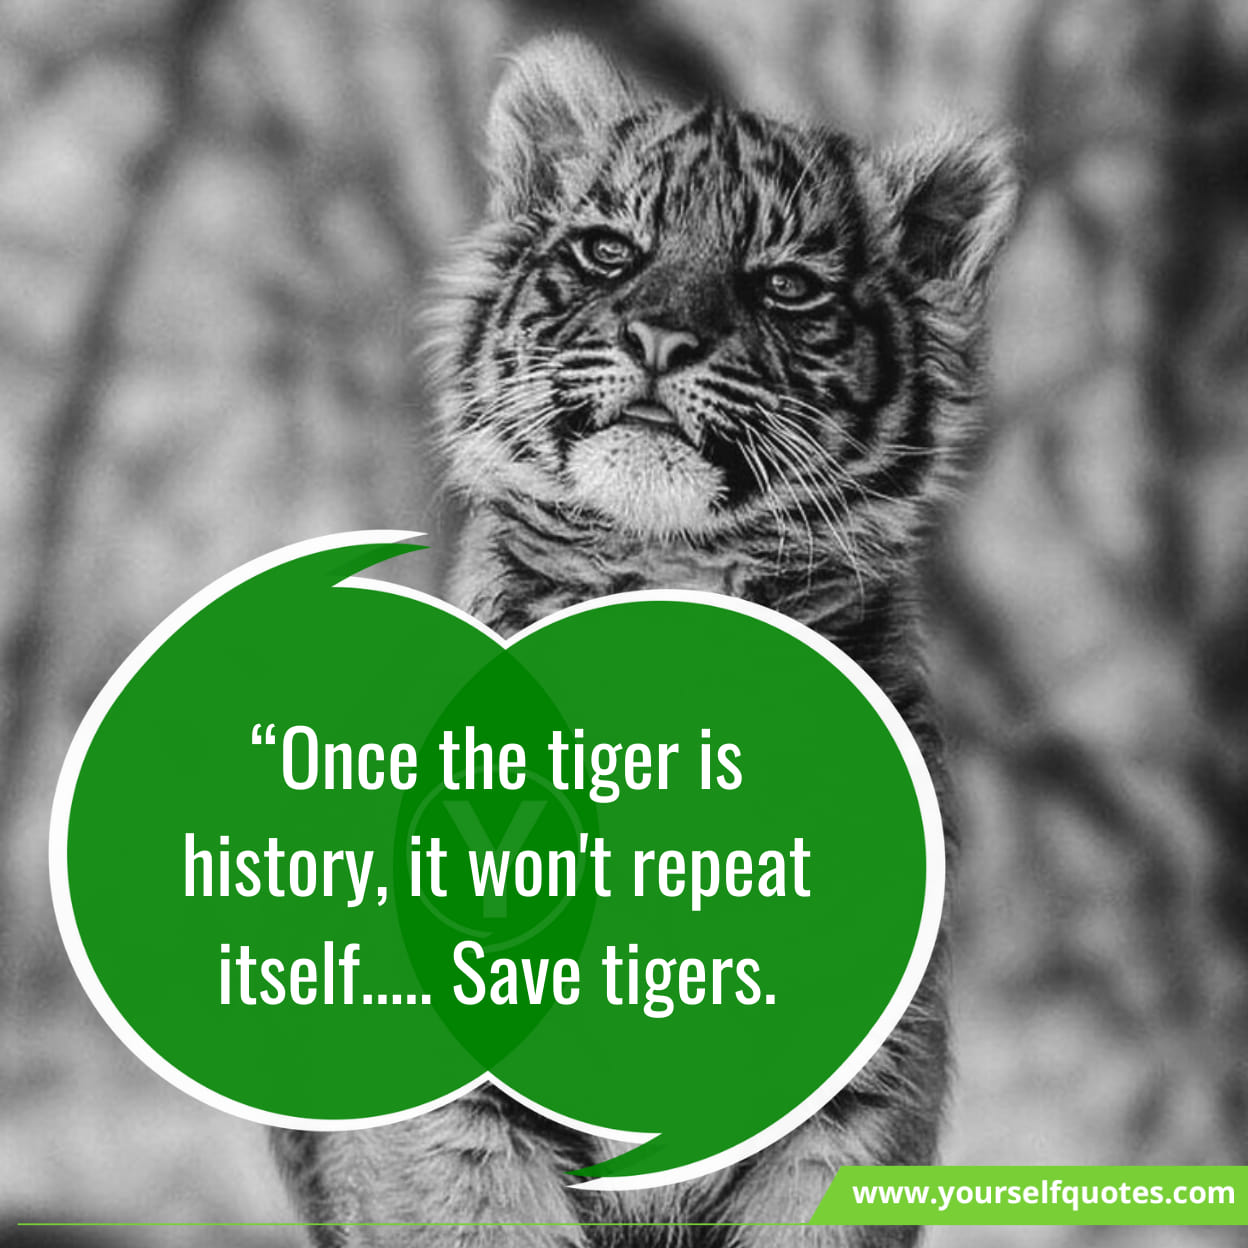 Tiger Day Quotes with Images & Wallpaper